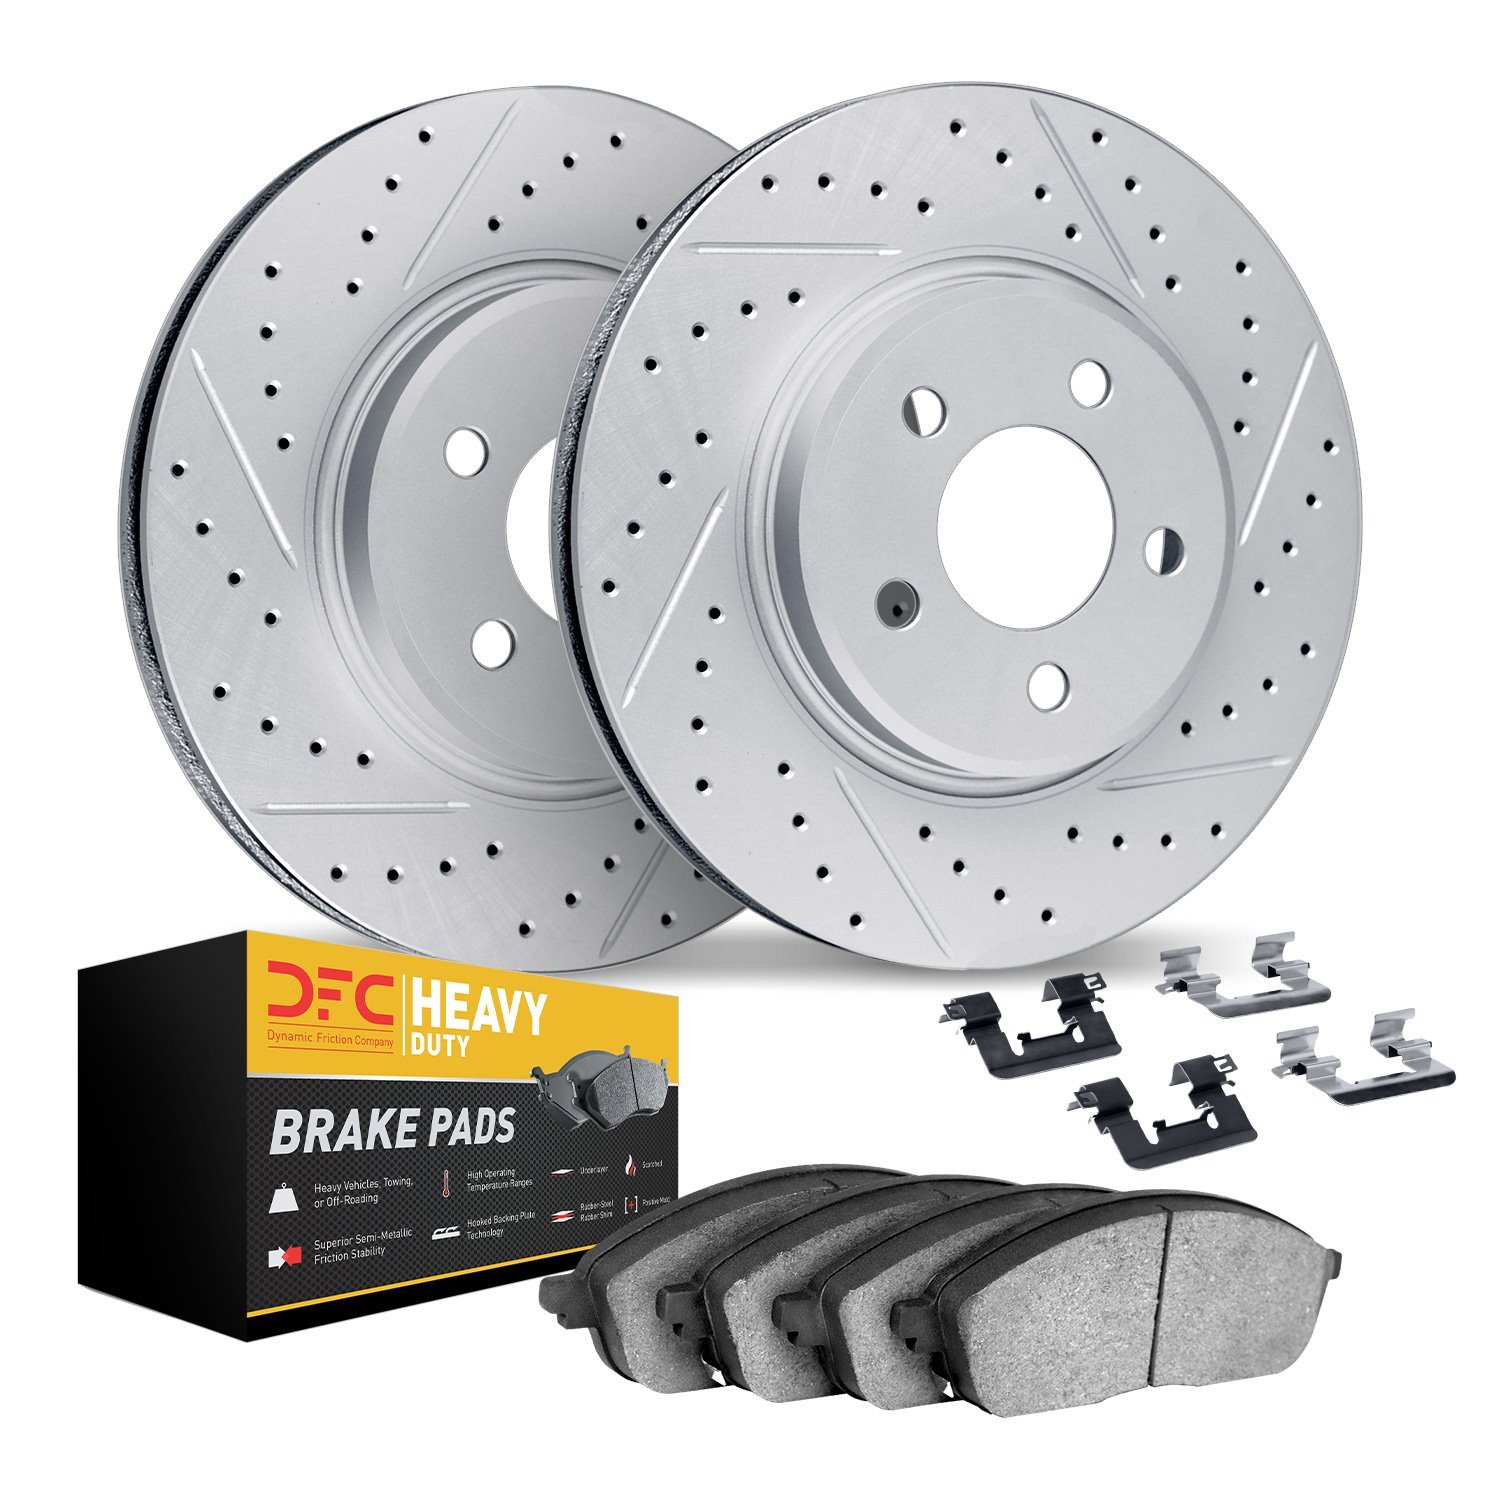 2212-99145 Geoperformance Drilled/Slotted Rotors w/Heavy-Duty Pads Kit & Hardware, 2004-2006 Ford/Lincoln/Mercury/Mazda, Positio